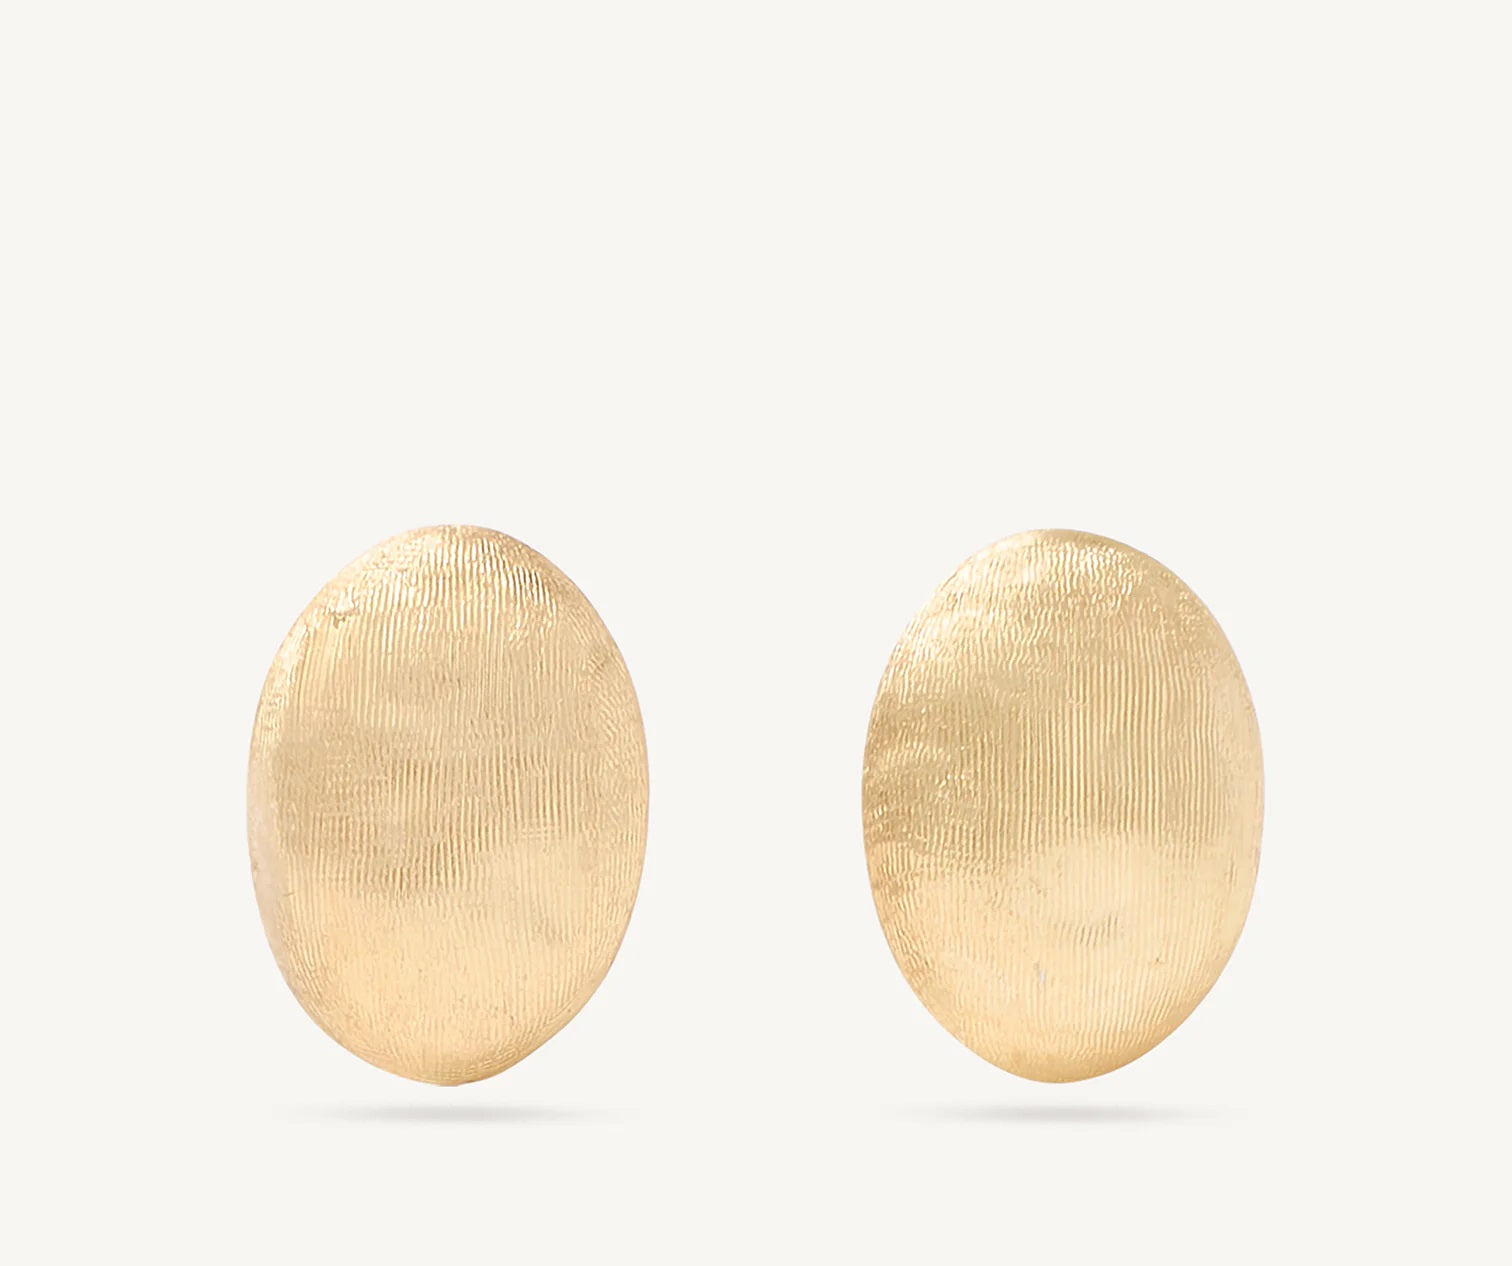 18K YELLOW GOLD OVAL STUD EARRINGS FROM THE SIVIGLIA COLLECTION